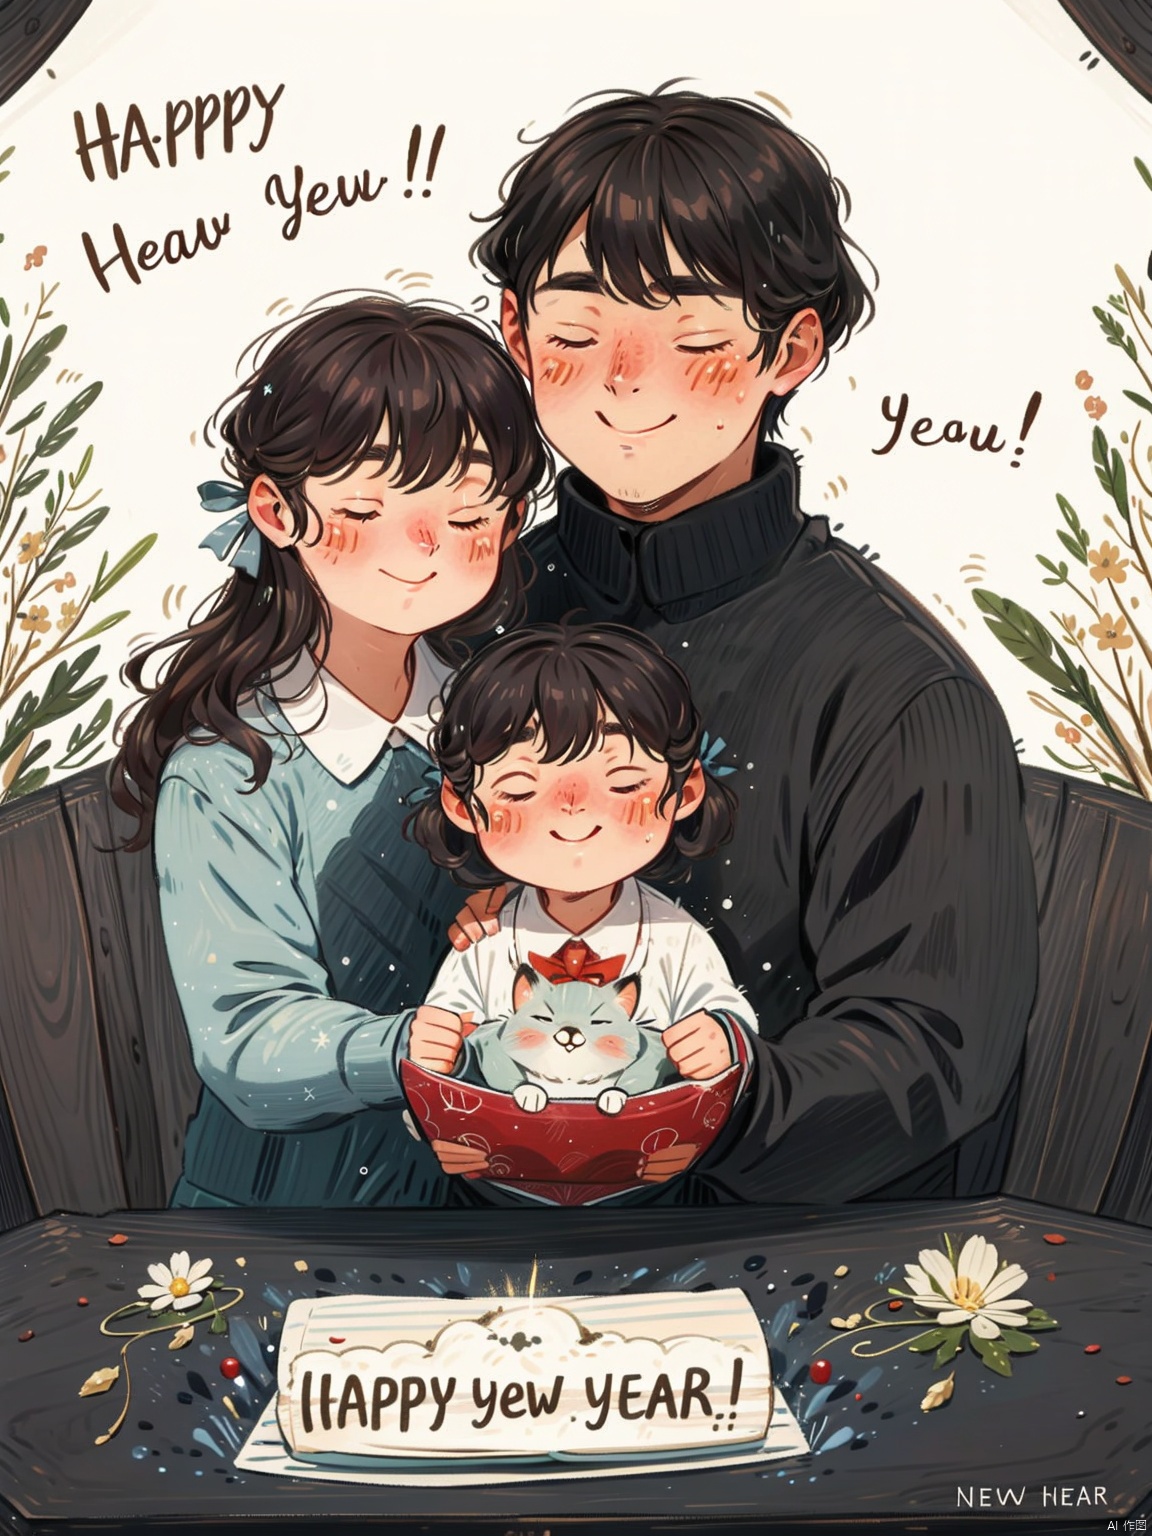  /imagine prompt: On New Year's Eve, the family happily gathers in their warm home